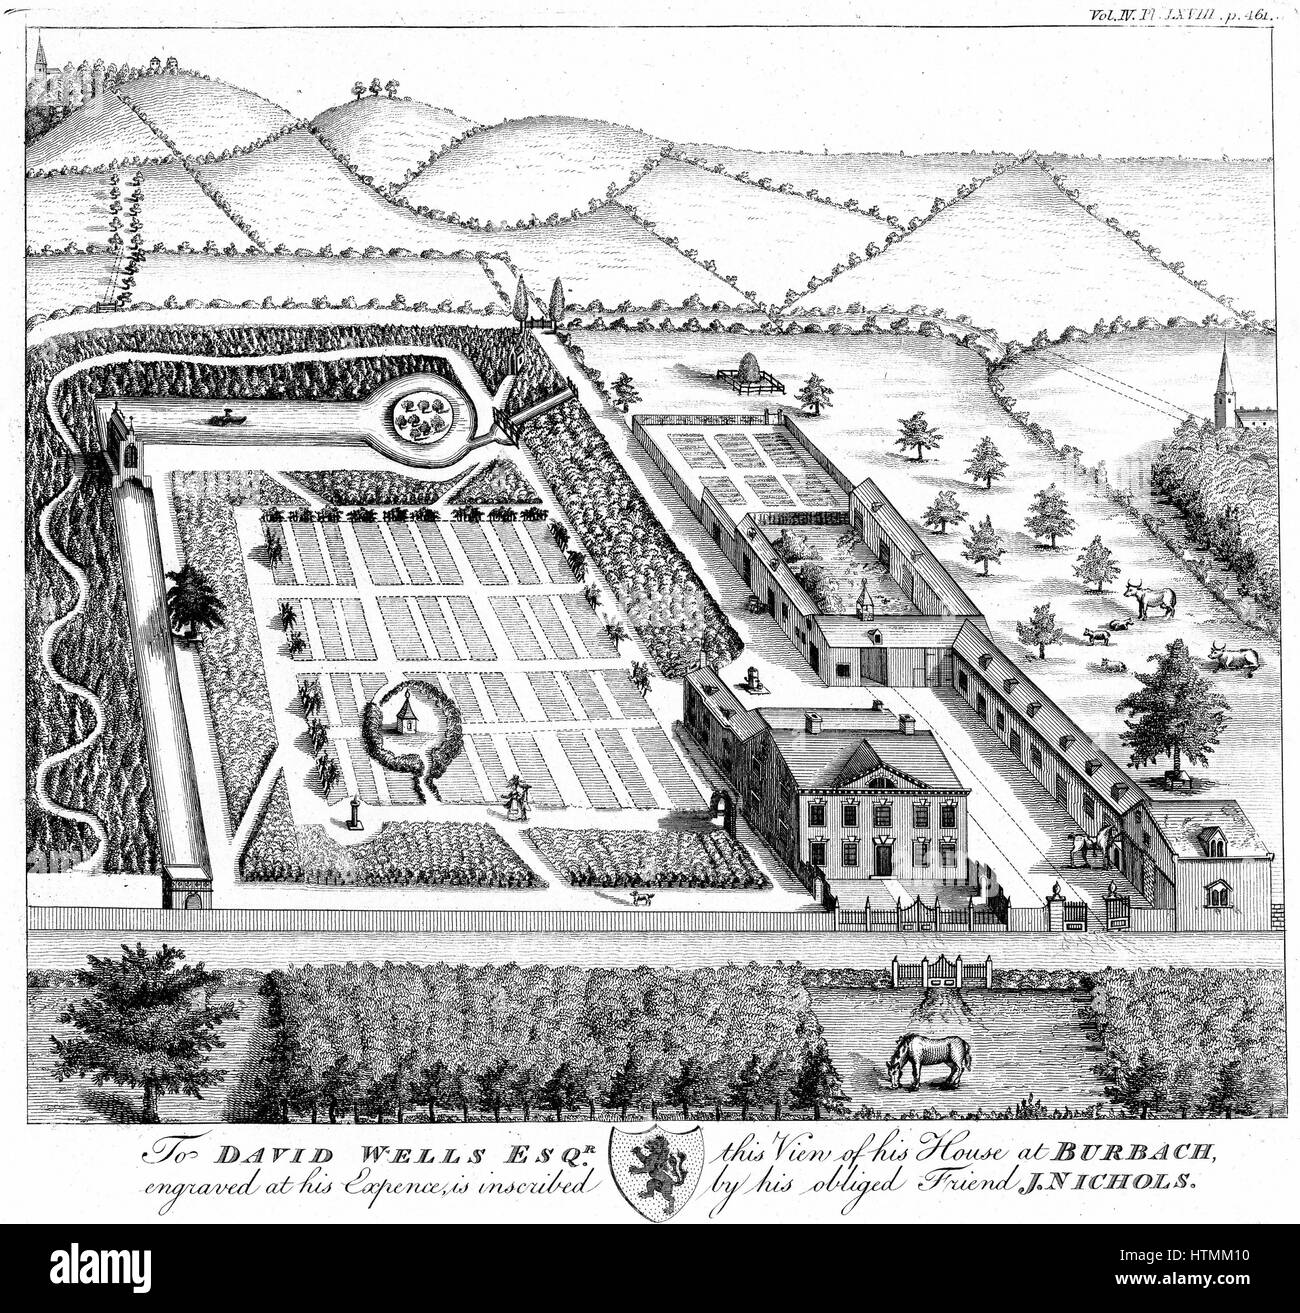 Estate of David Wells, Burbage, Leicestershire, England showing house and garden, model farm, enclosed fields, parkland & woodland. Copperplate engraving c1750 Stock Photo